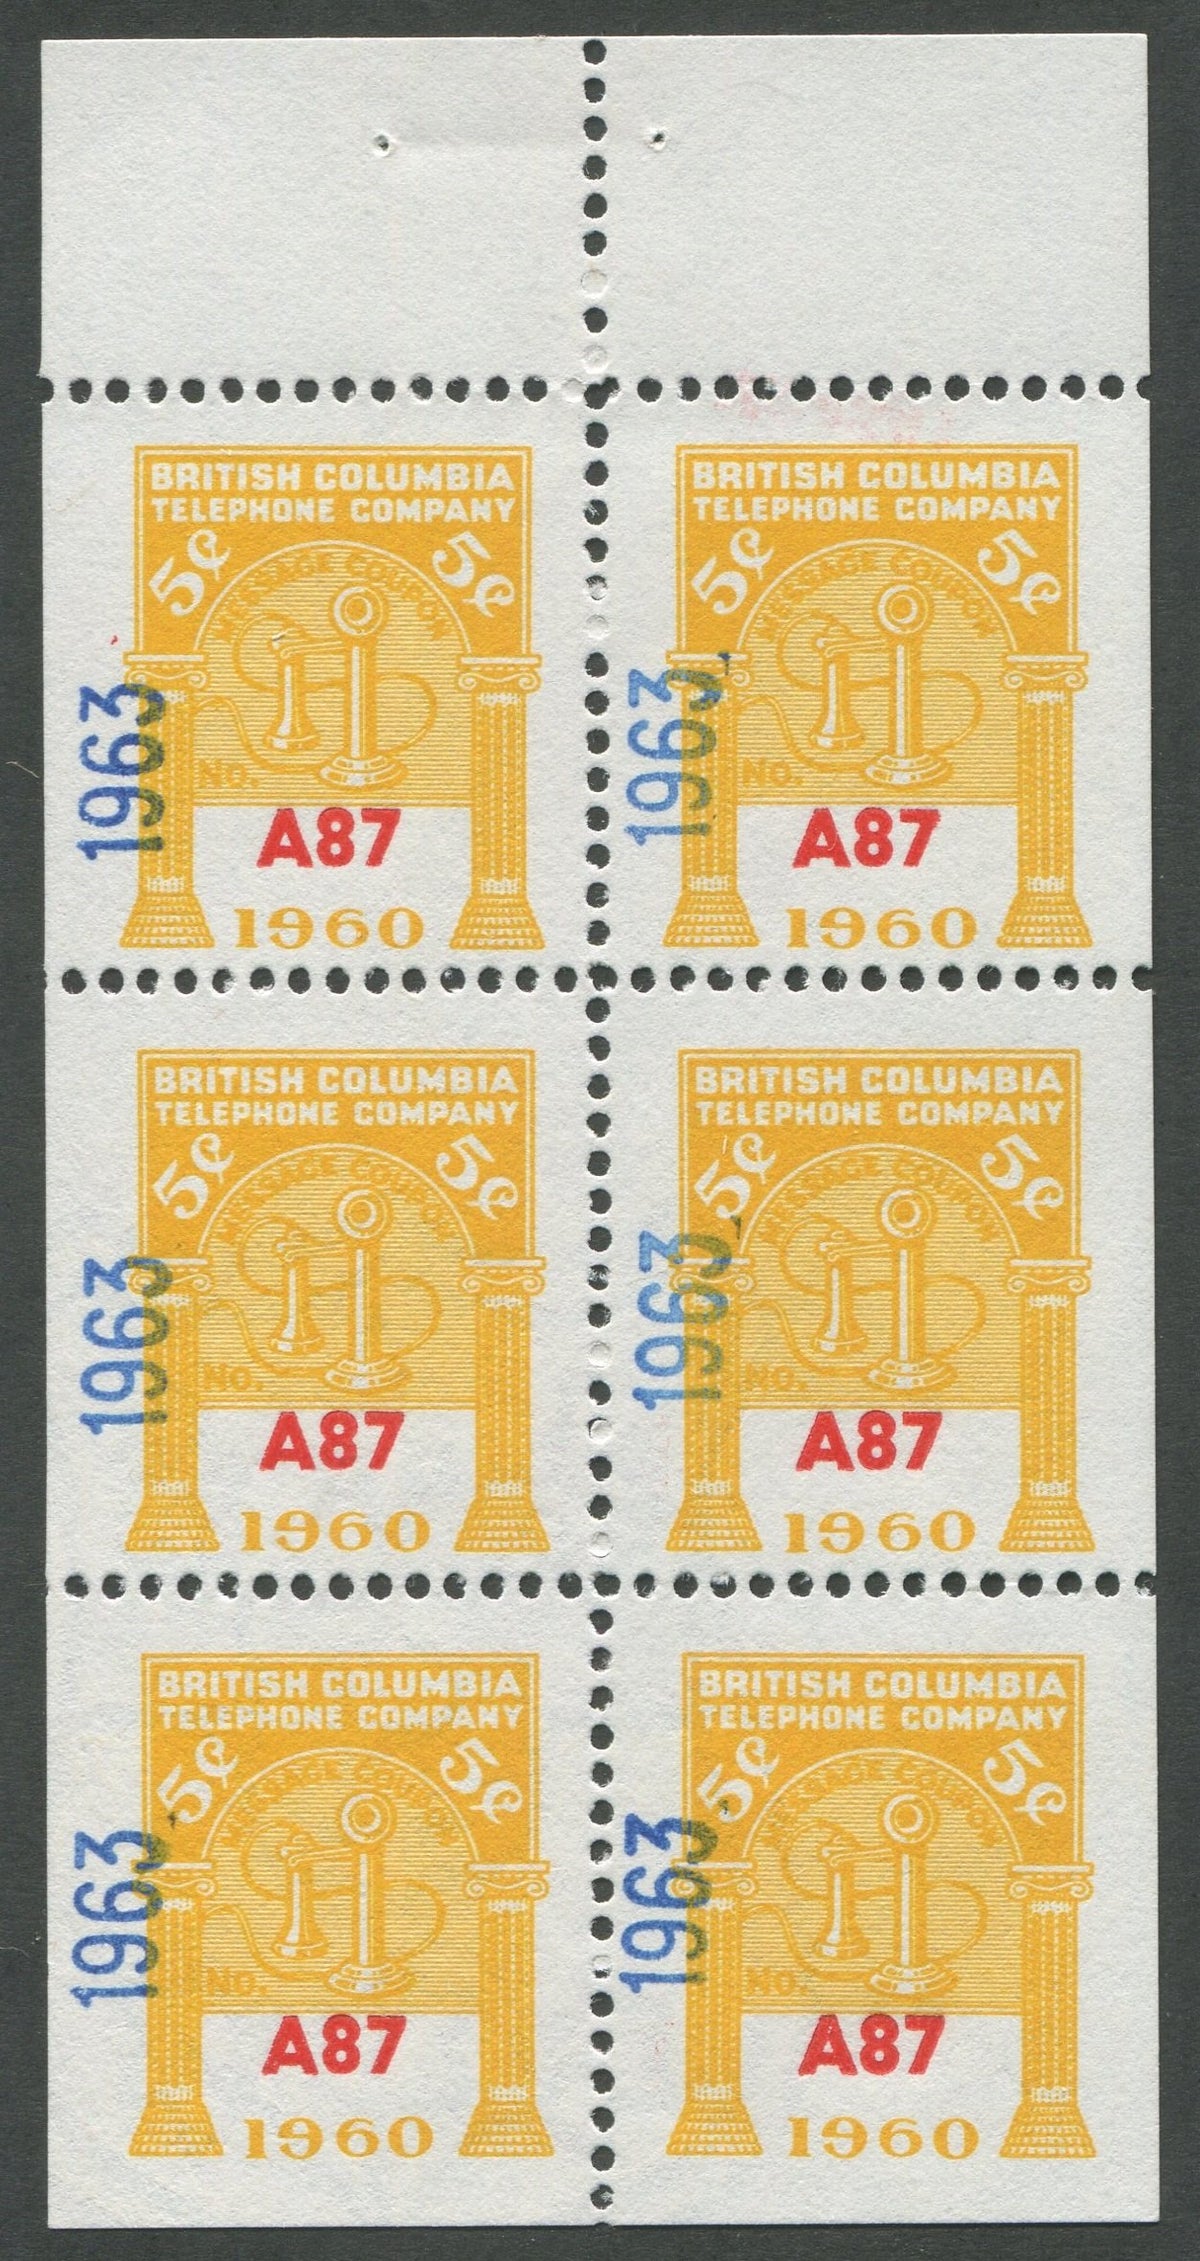 0297BC1708 - BCT199 - Mint Booklet Pane, Watermarked